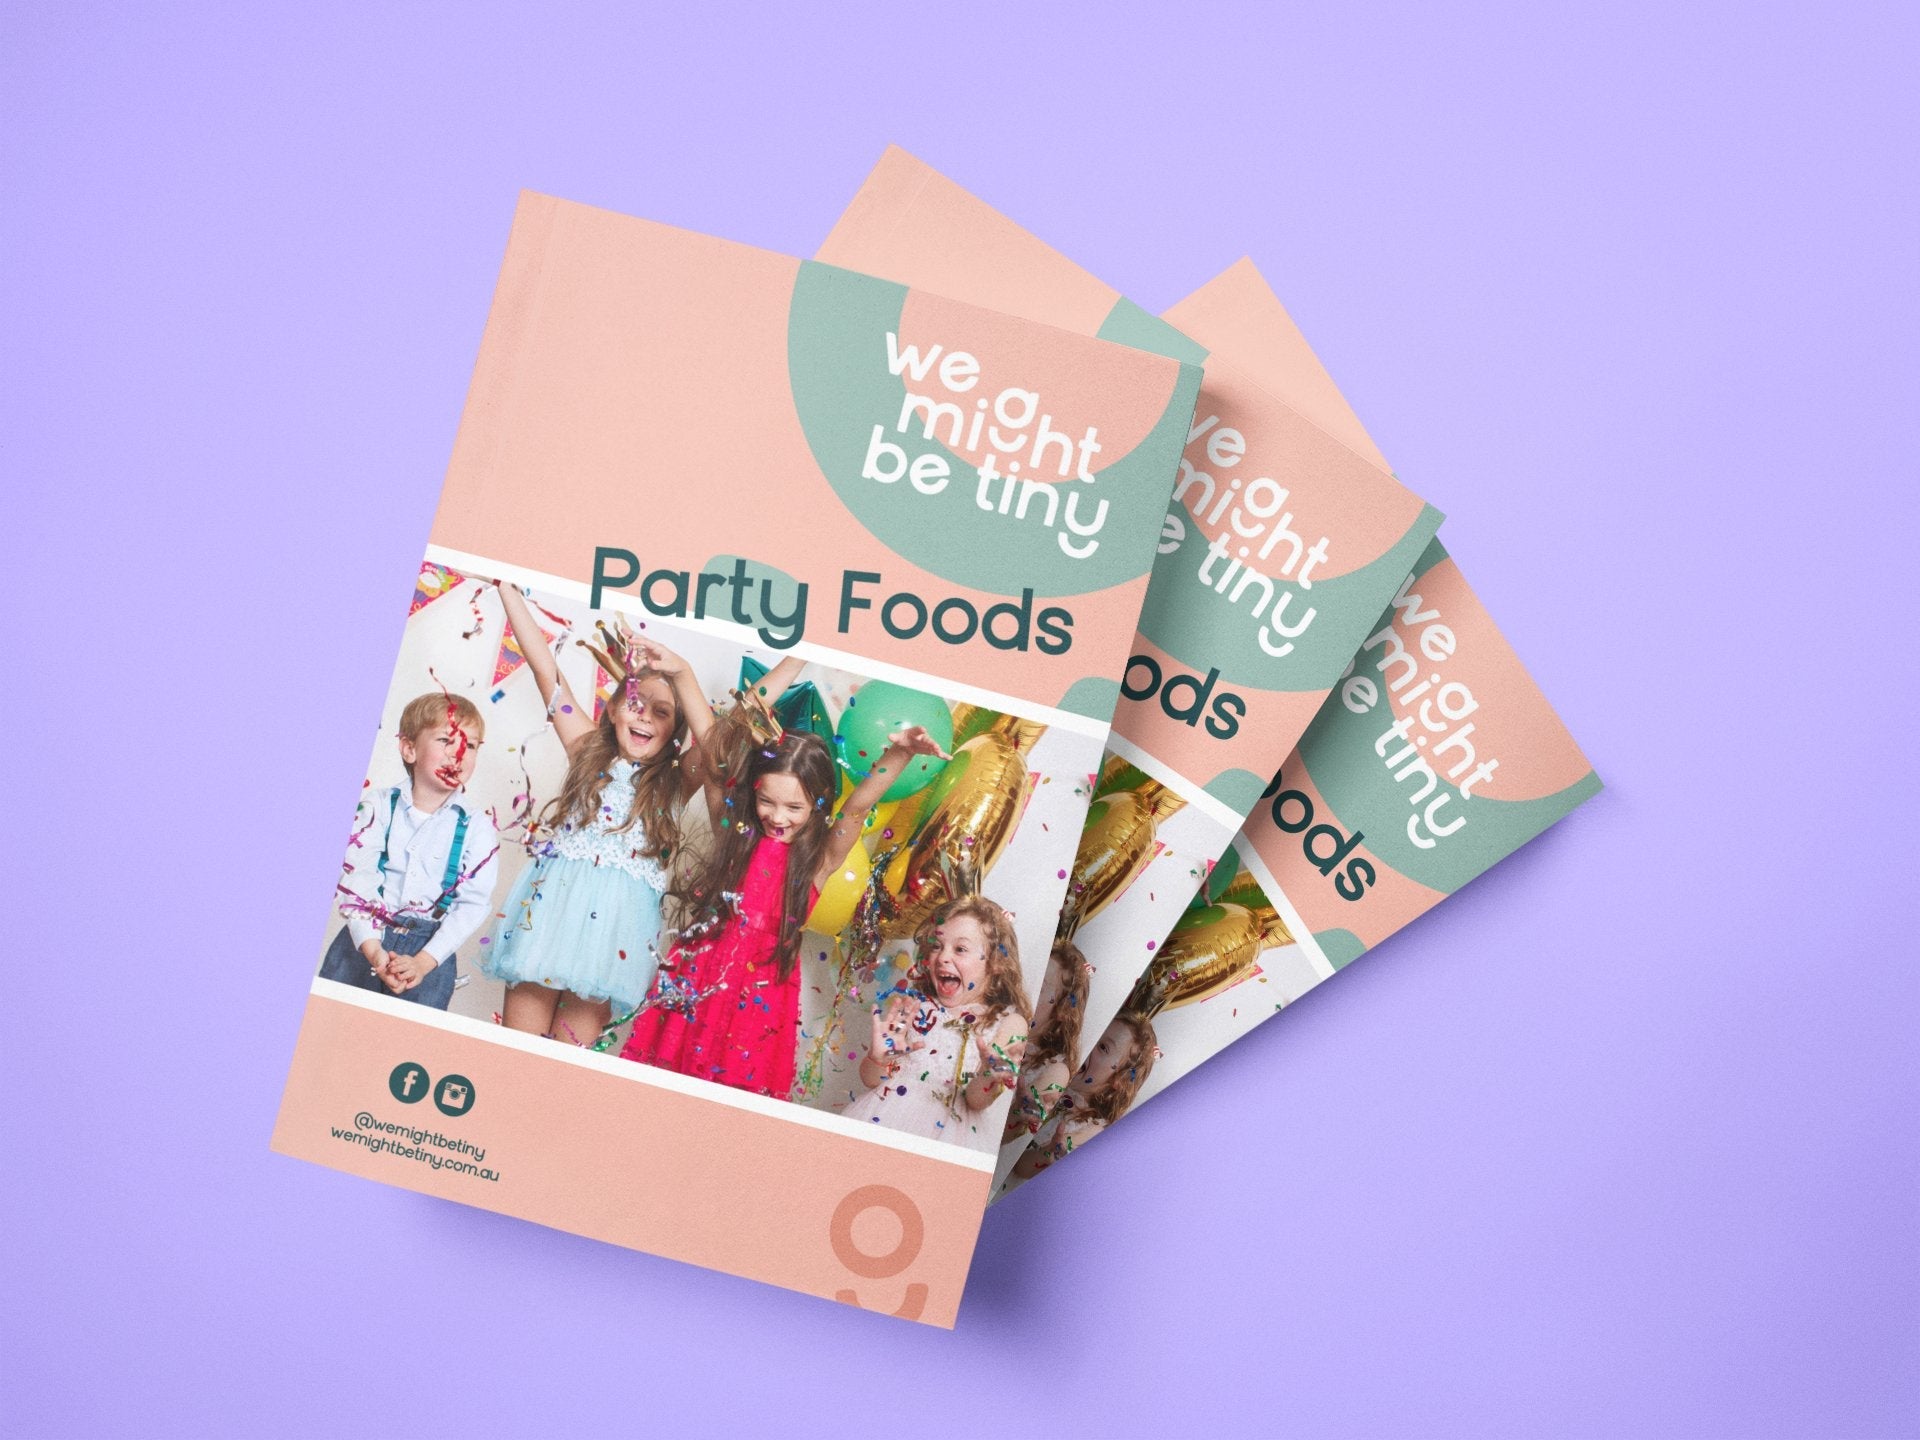 » Party Foods – A5 Booklet (100% off)